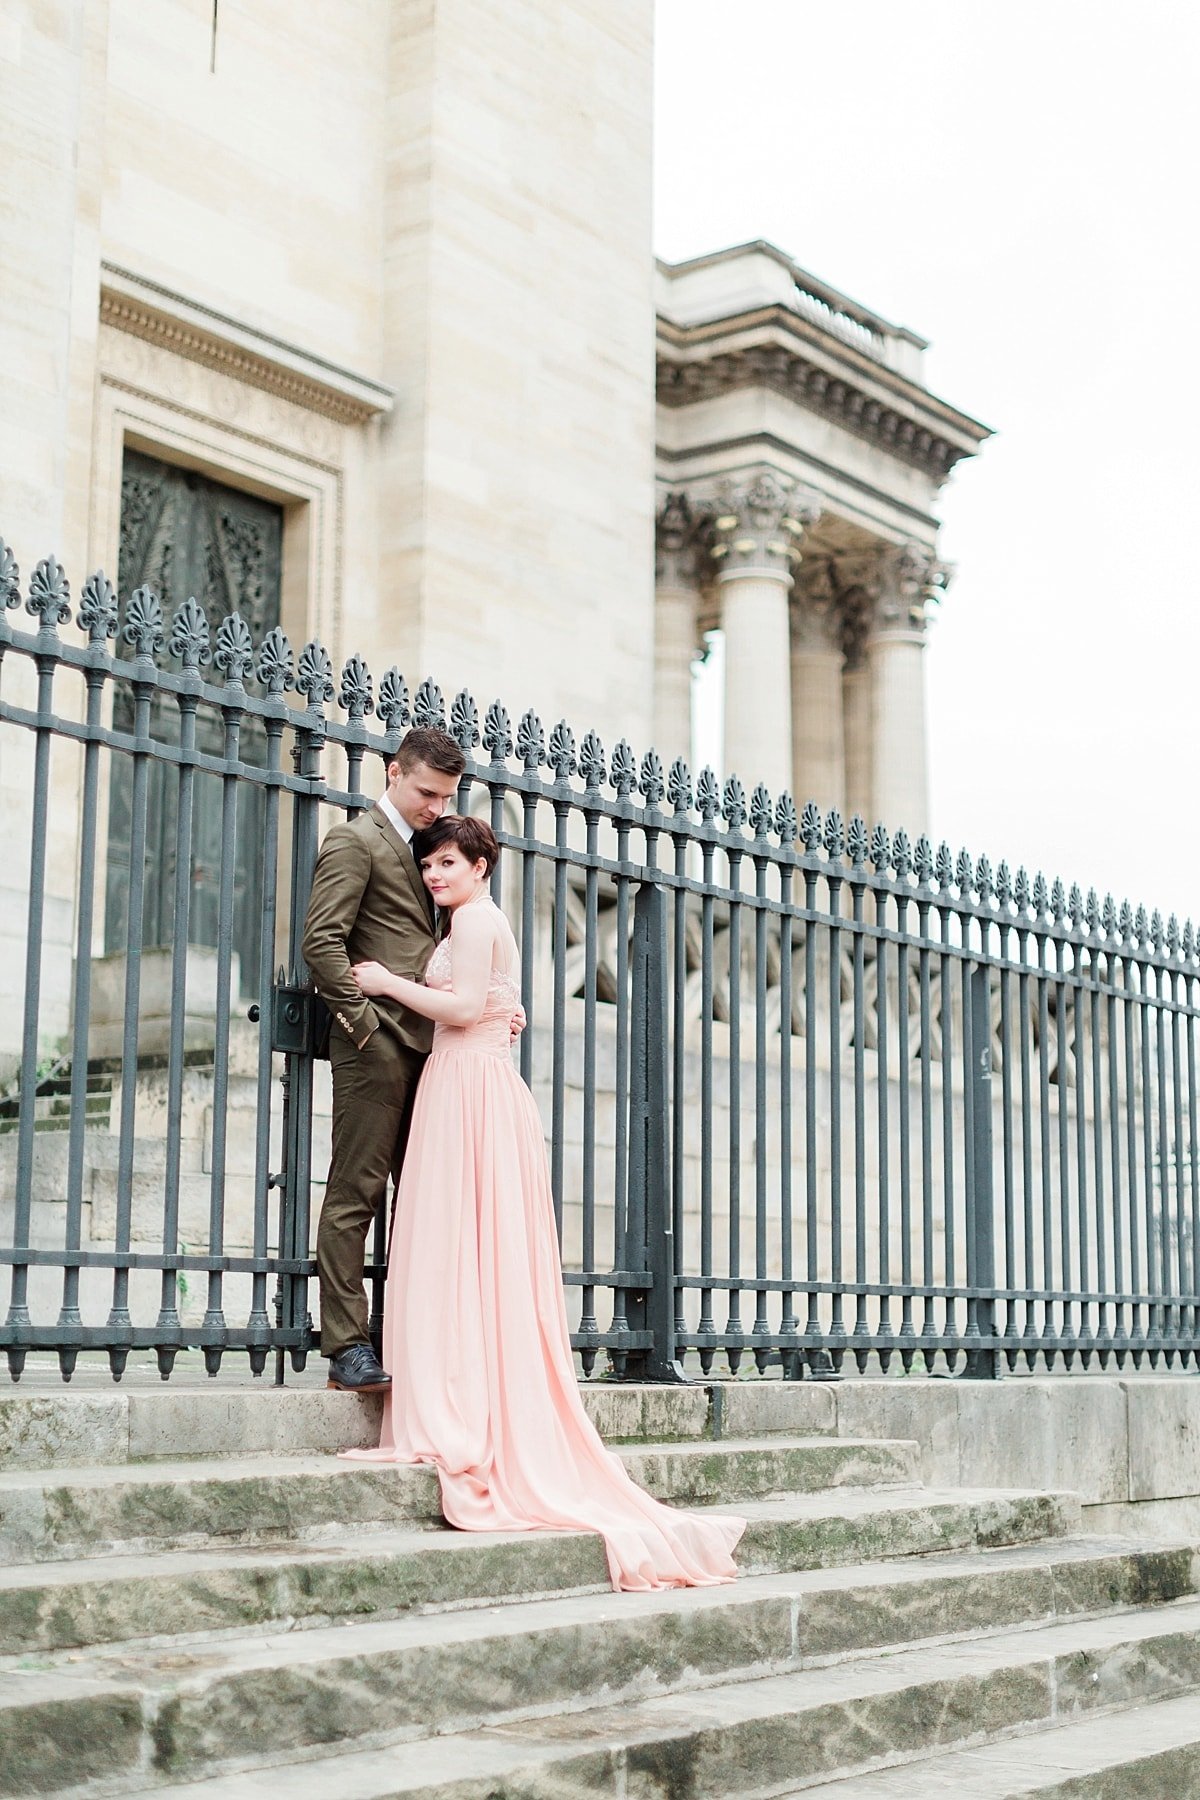 Fall Paris anniversary session at the Pantheon photographed by Alicia Yarrish